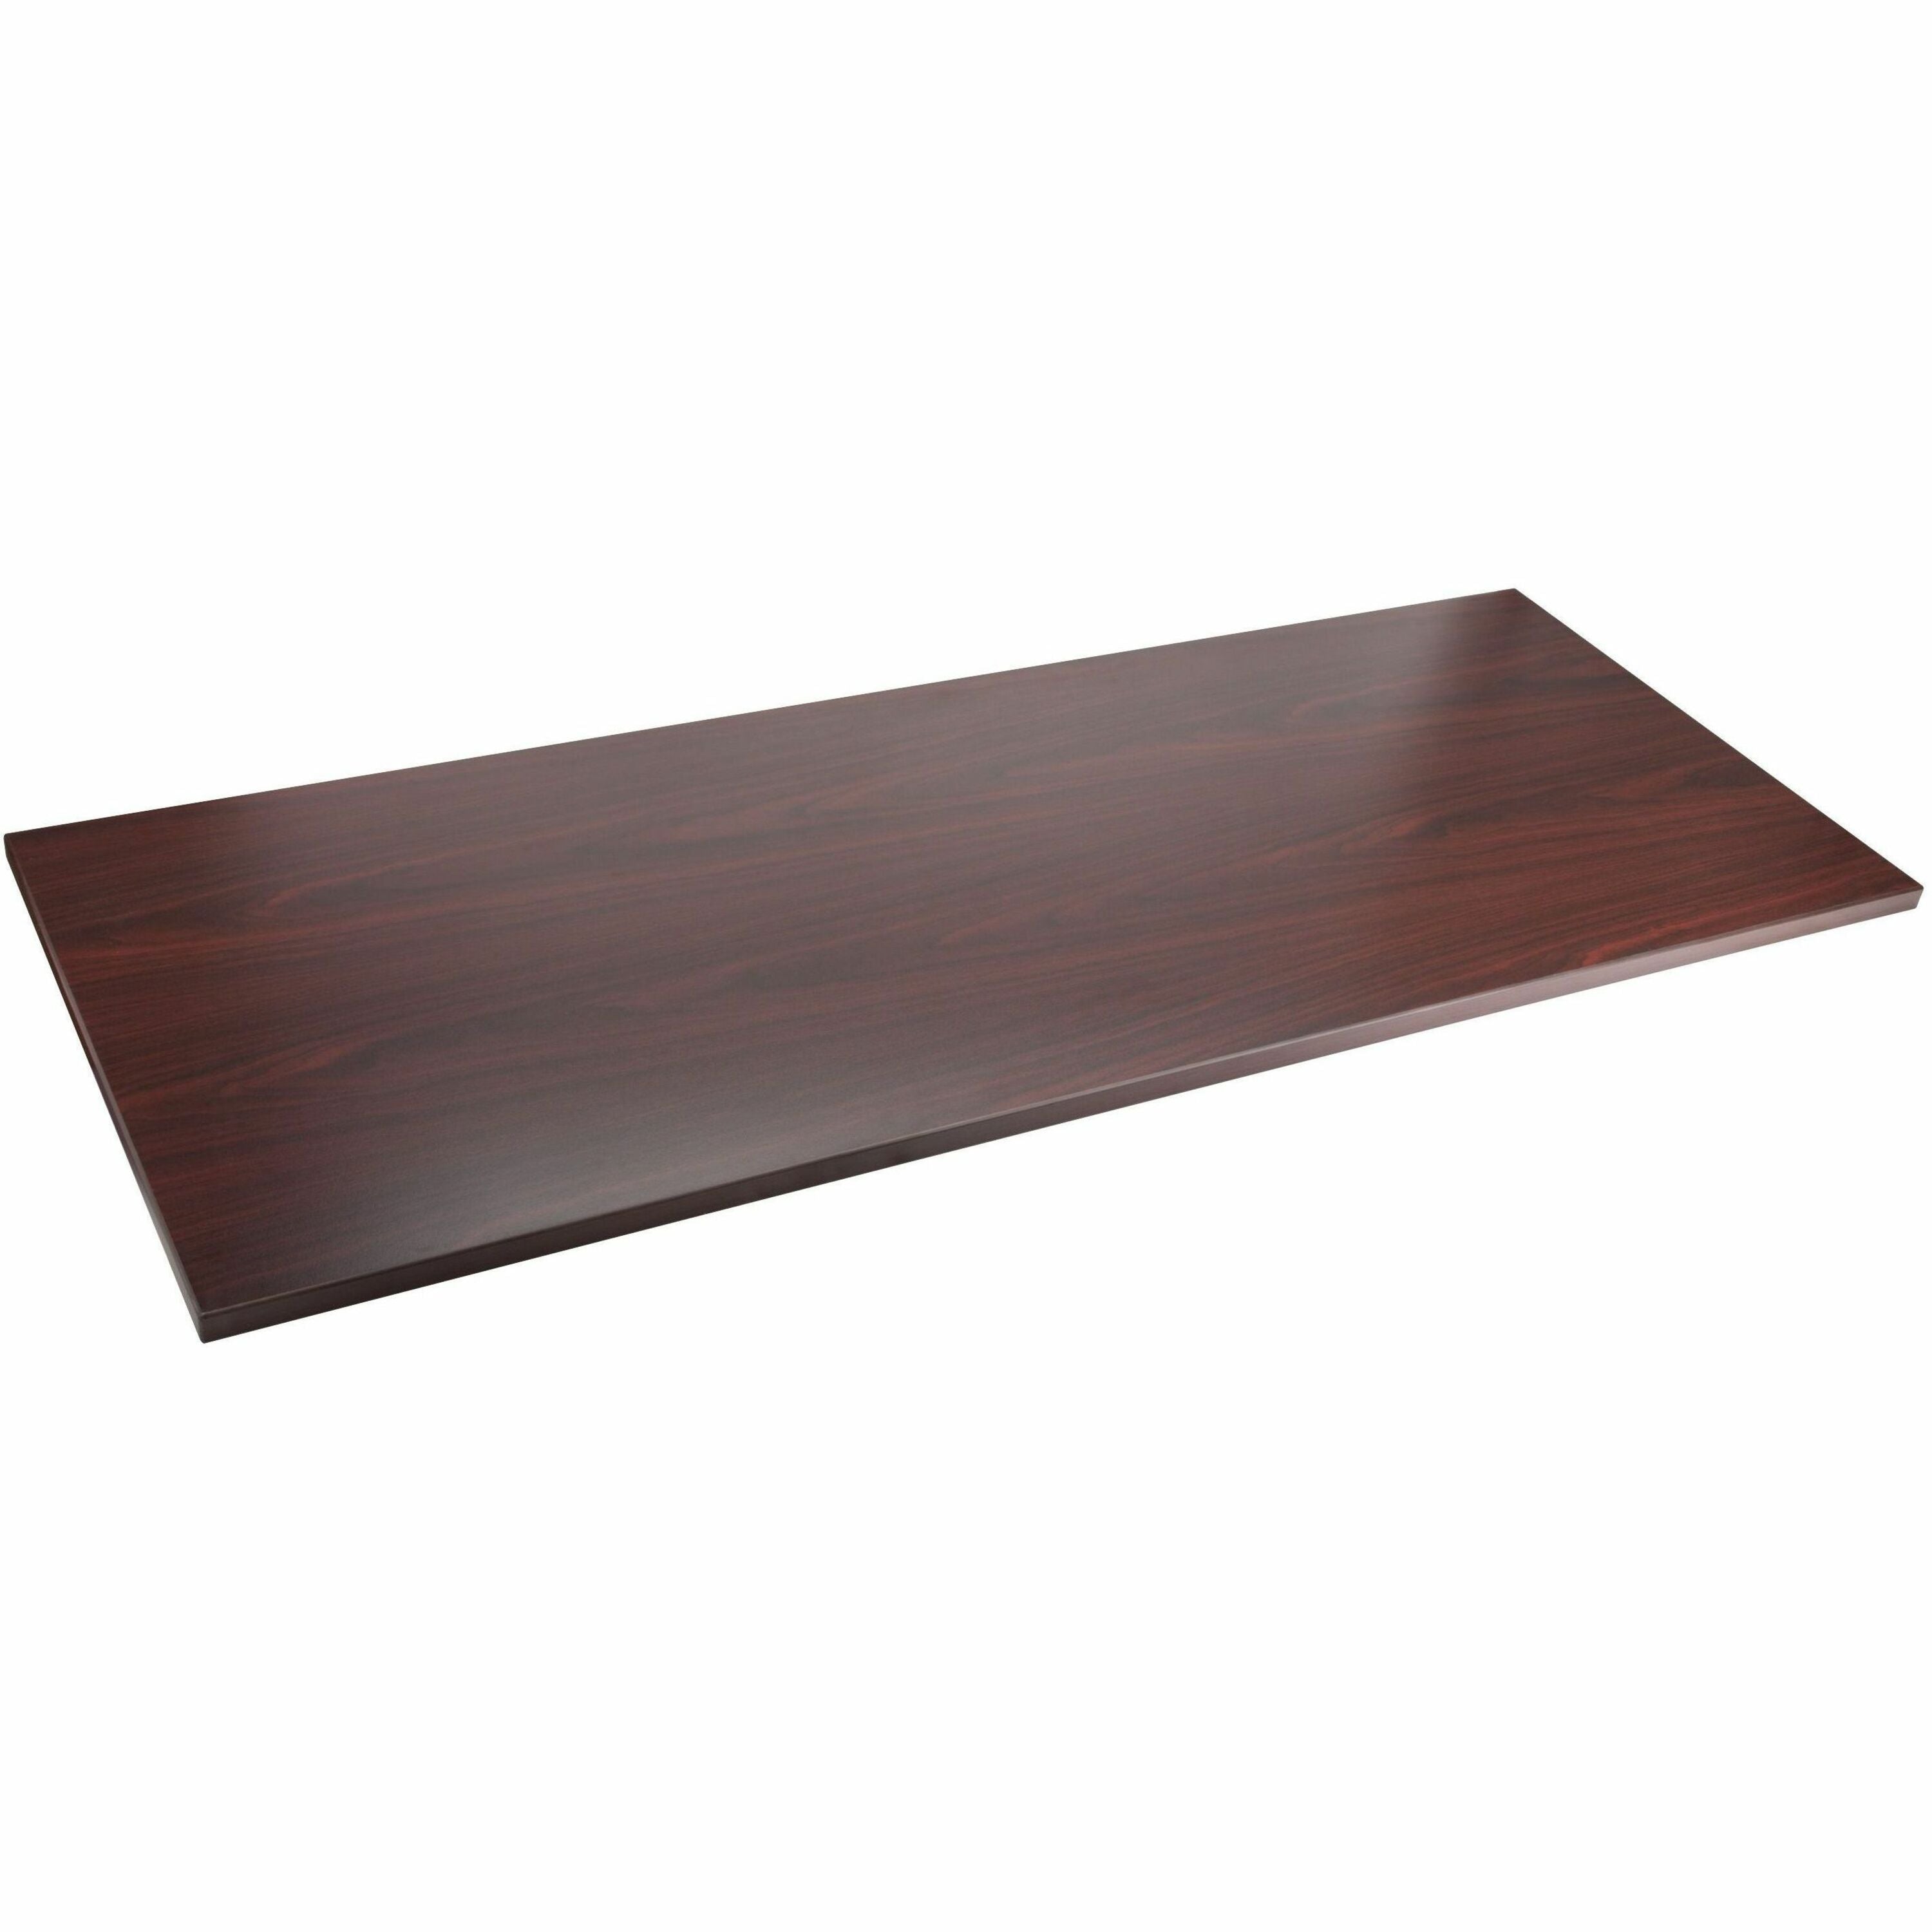 Lorell Relevance Series Tabletop - For - Table TopLaminated Rectangle, Mahogany Top - Contemporary Style x 60" Table Top Width x 24" Table Top Depth x 1" Table Top Thickness x 59.88" Width x 23.63" Depth - Assembly Required - 1 Each - 